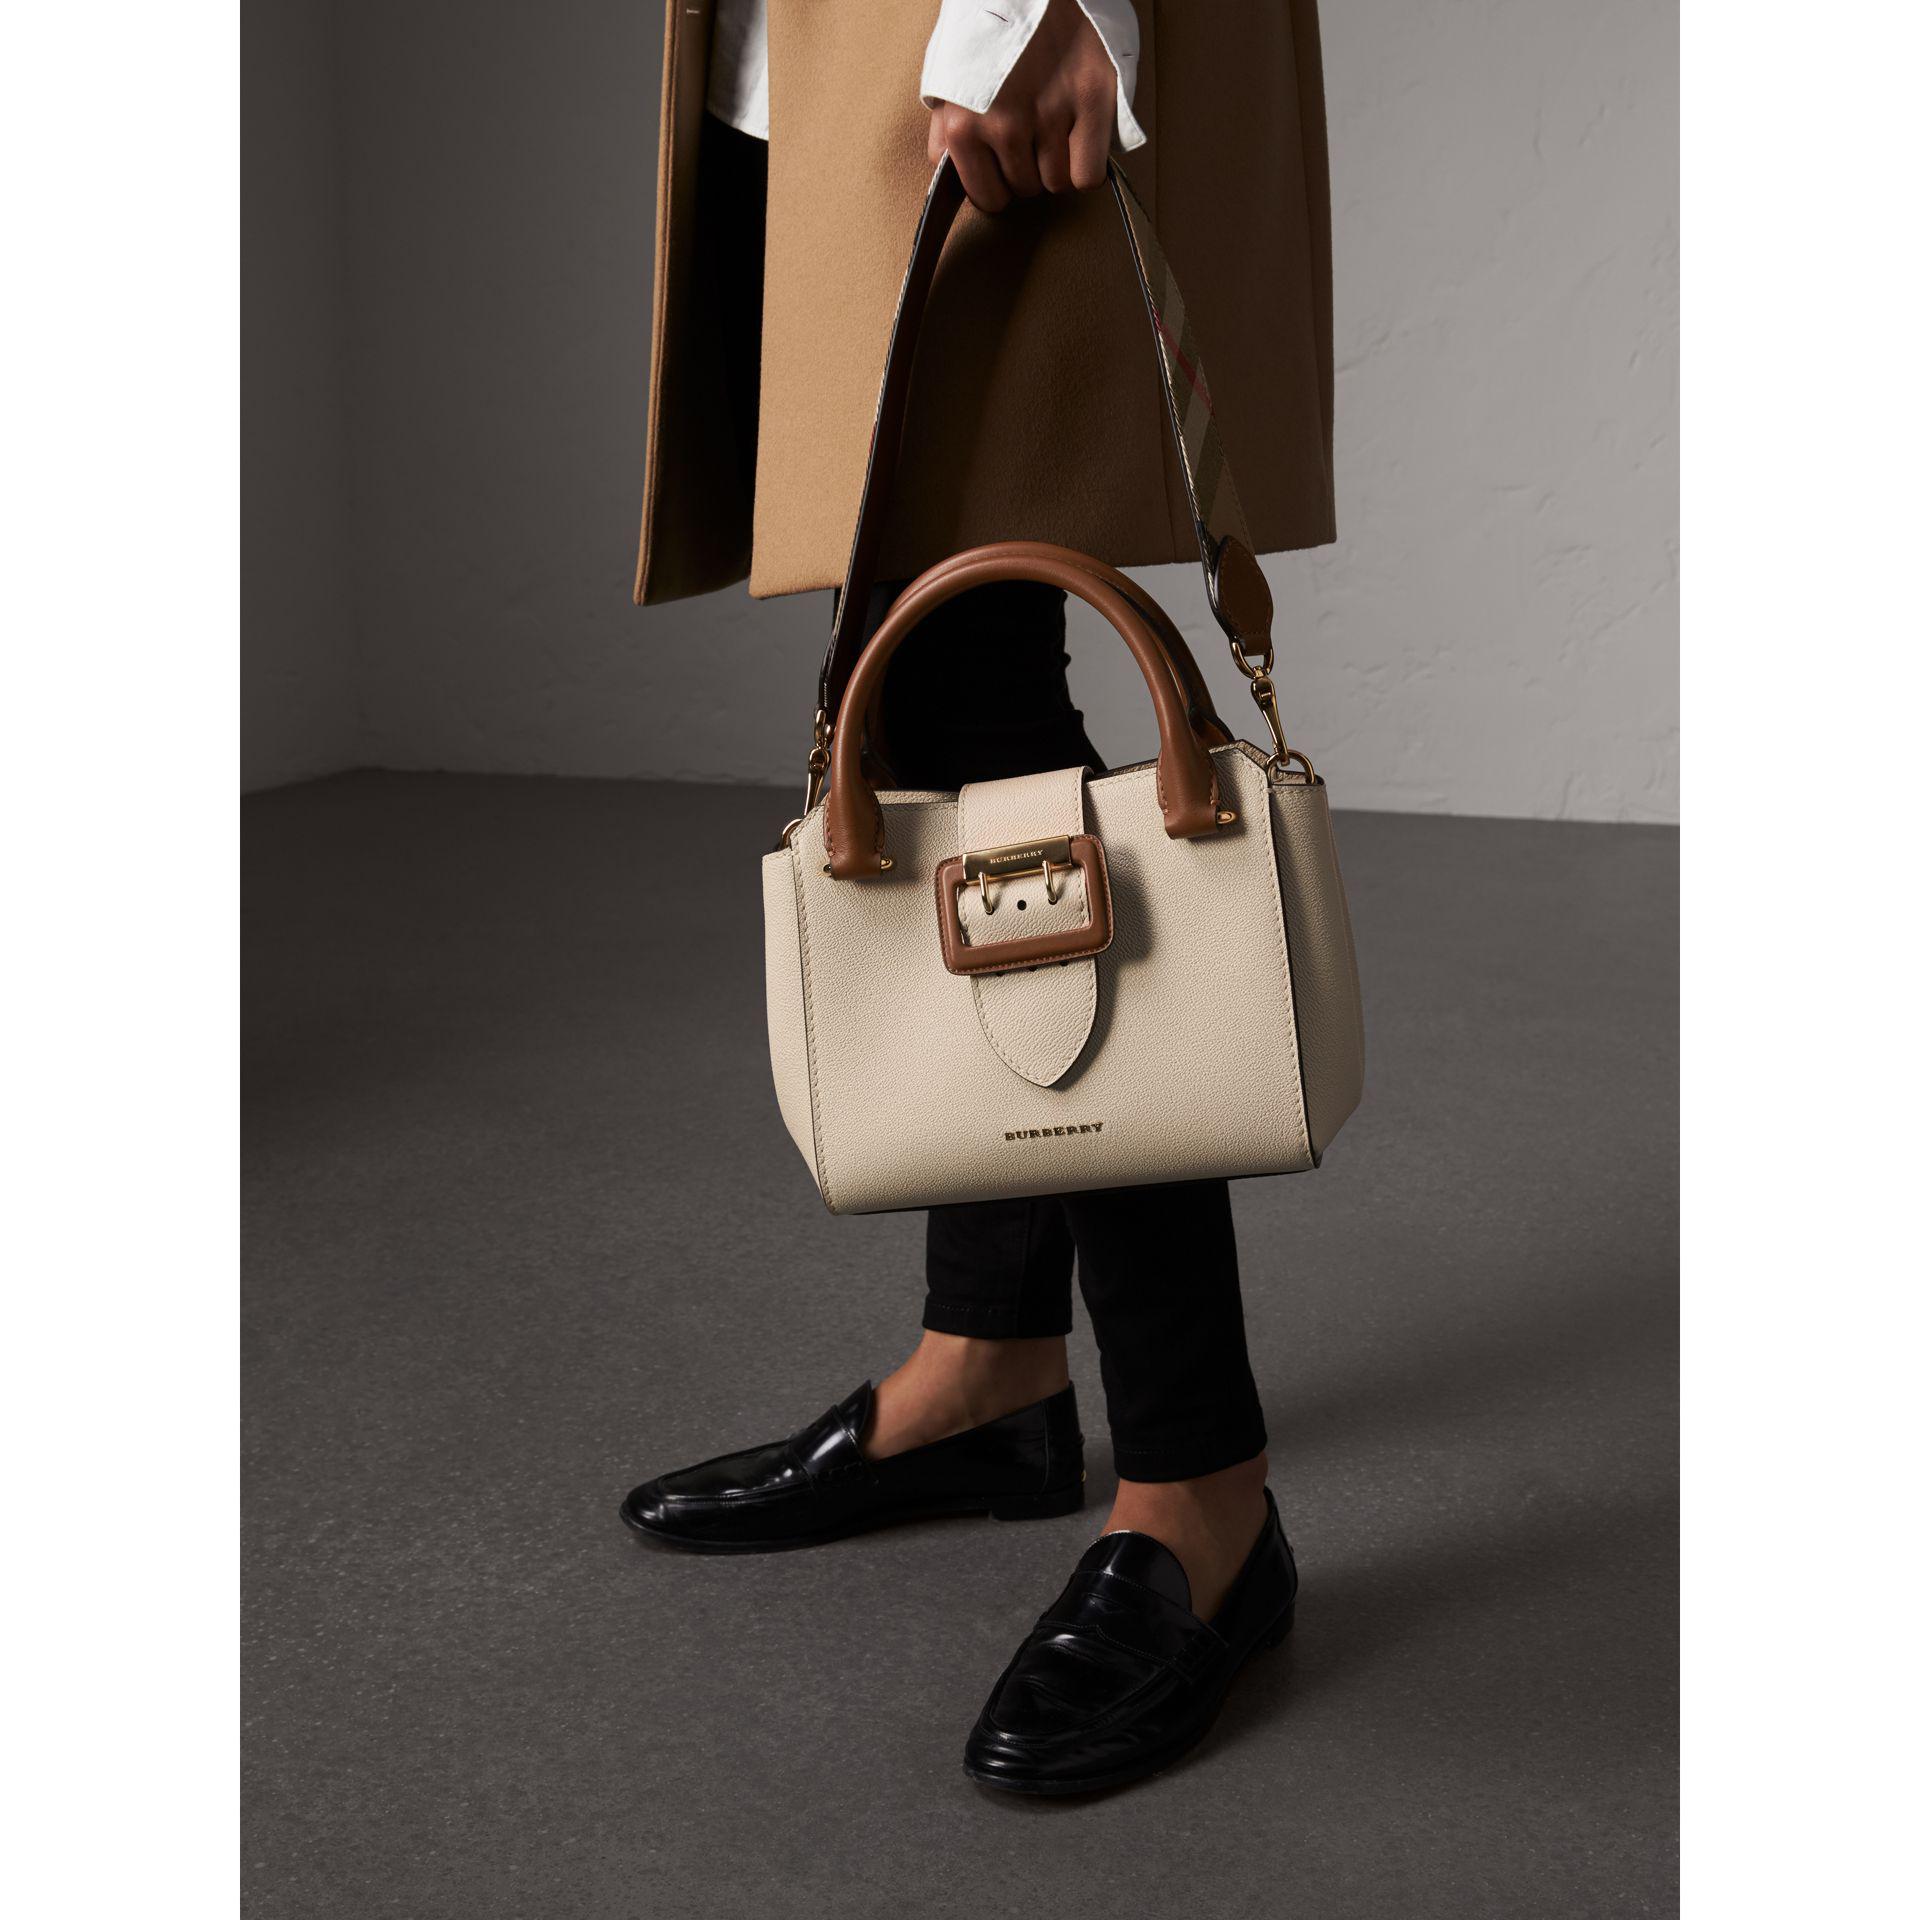 Burberry Small Buckle Tote France, SAVE 48% 